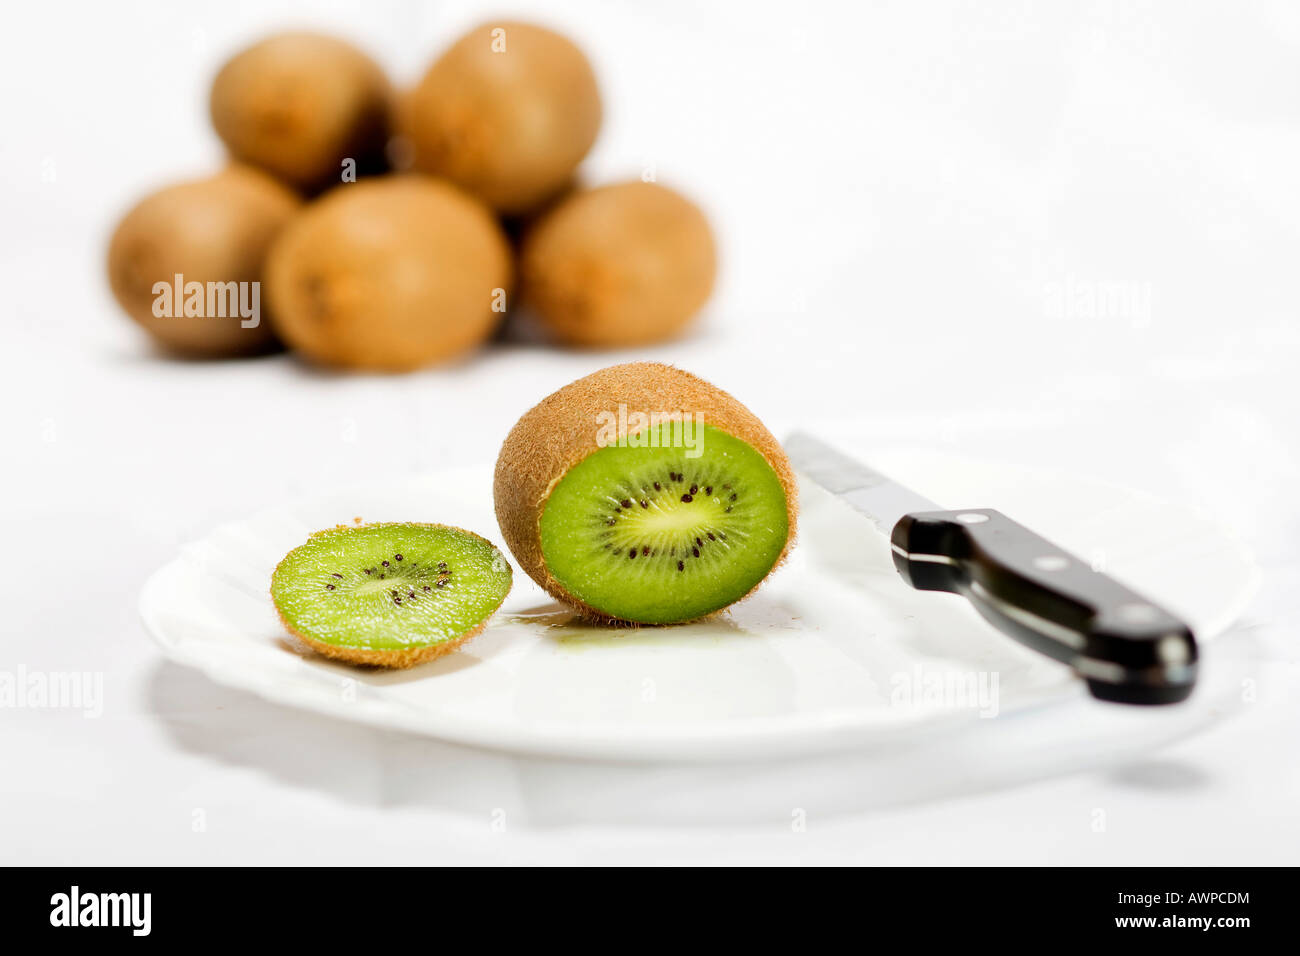 Single kiwi cut open on a plate with knife, more kiwis piled at the back Stock Photo